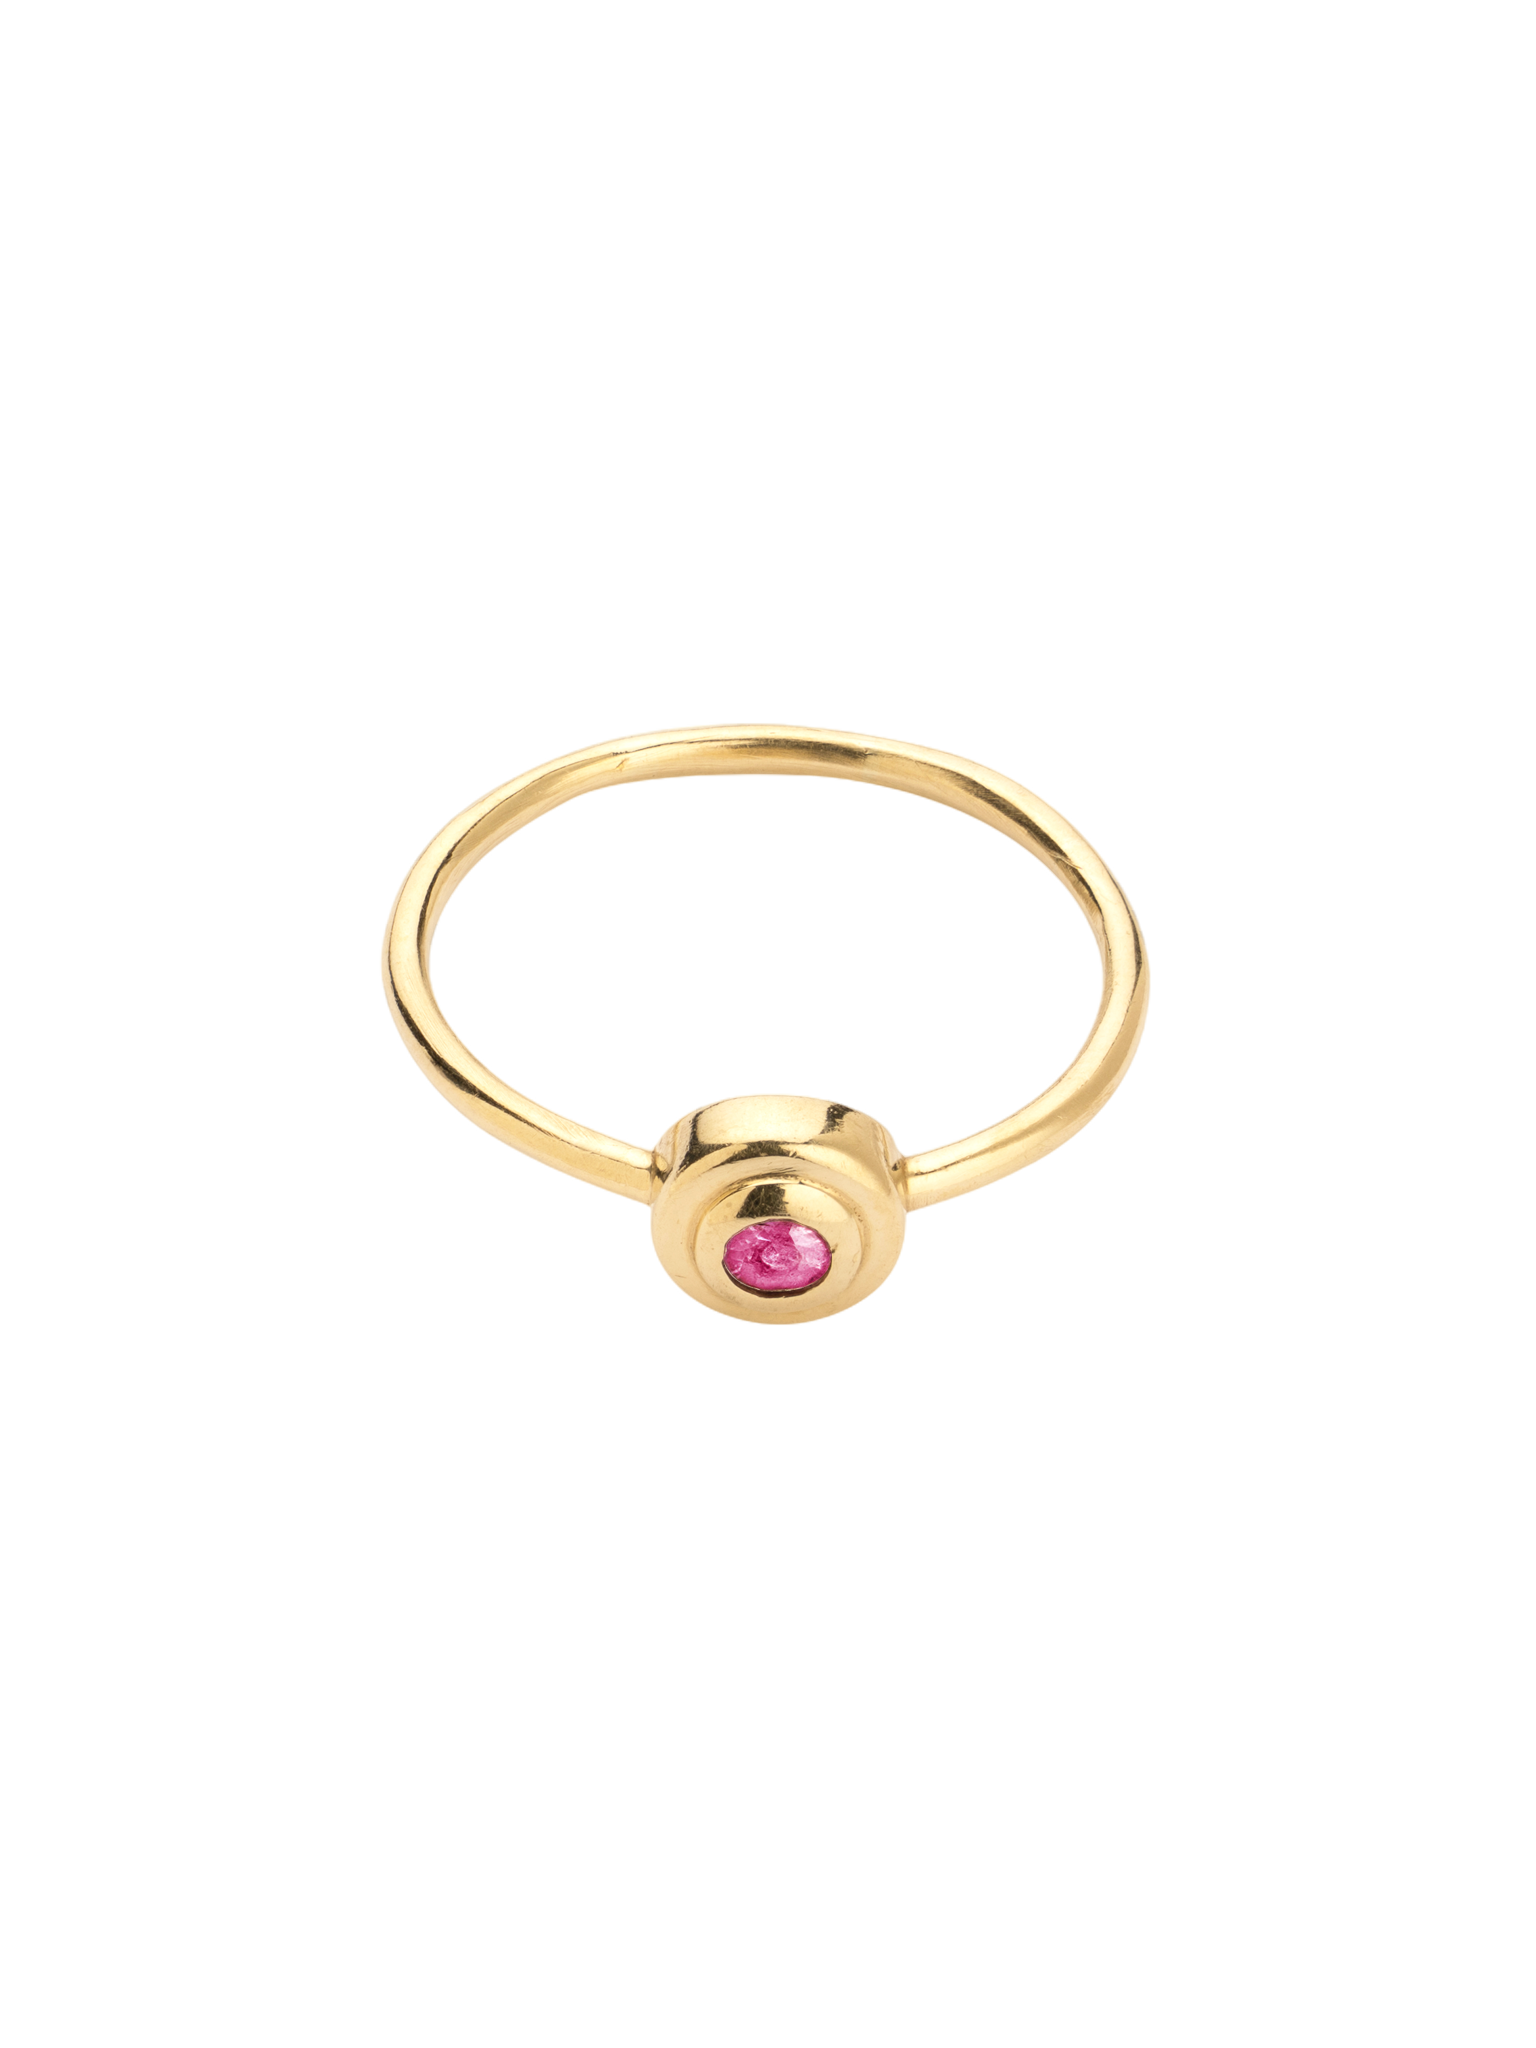 Concentric circles pink sapphire ring